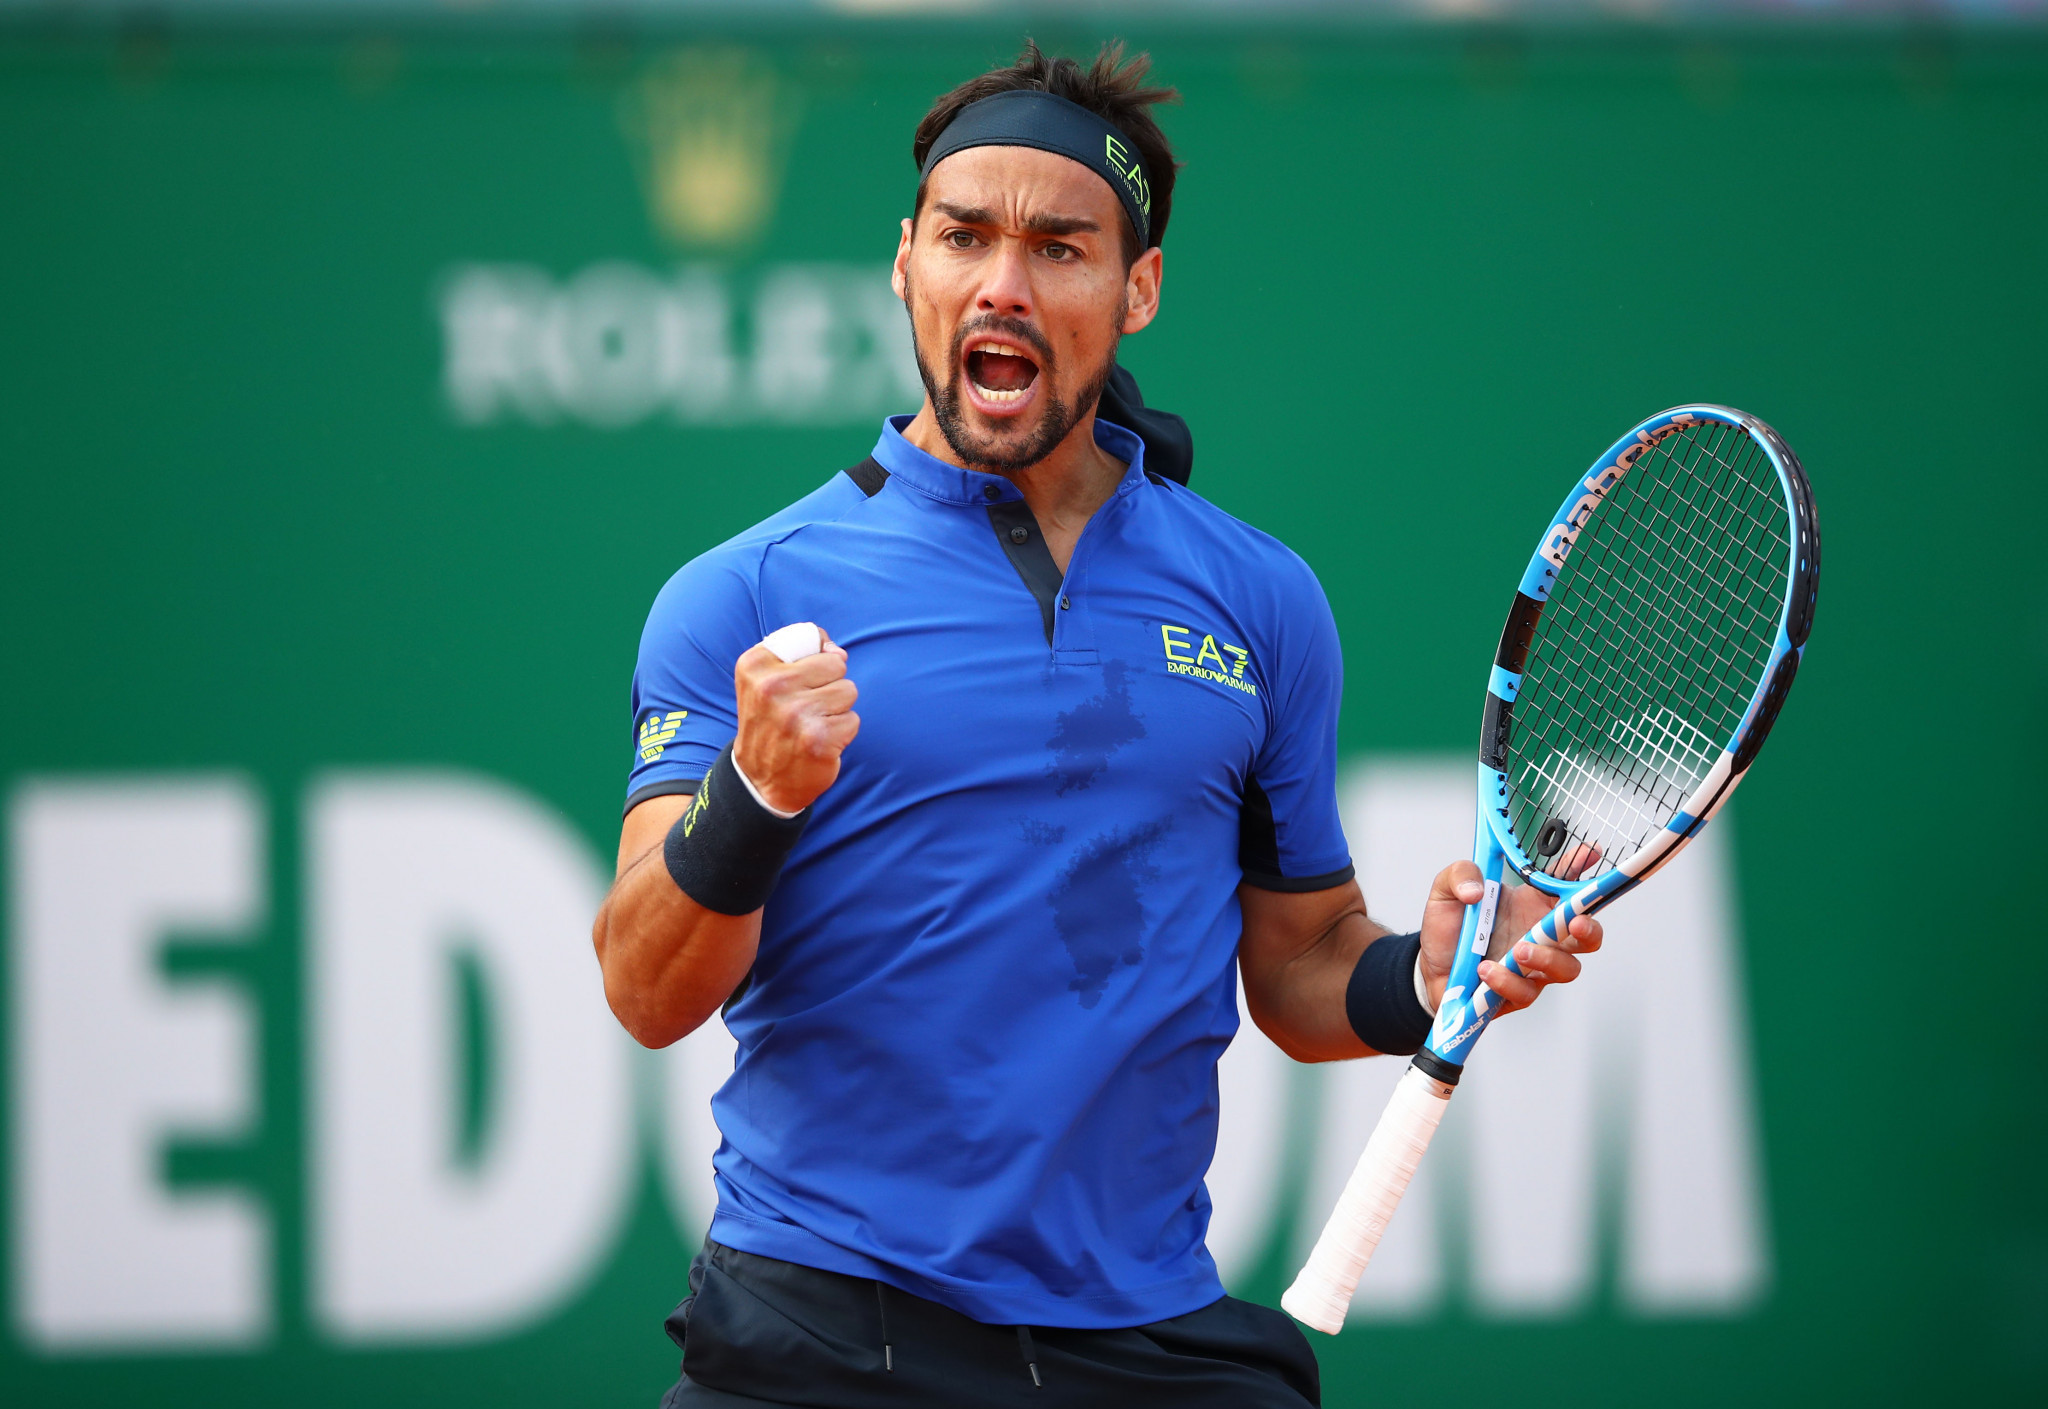 Fabio Fognini was set to face Nick Kyrgios at the Sydney Tennis Classic prior to the Australian's positive COVID-19 test ©Getty Images